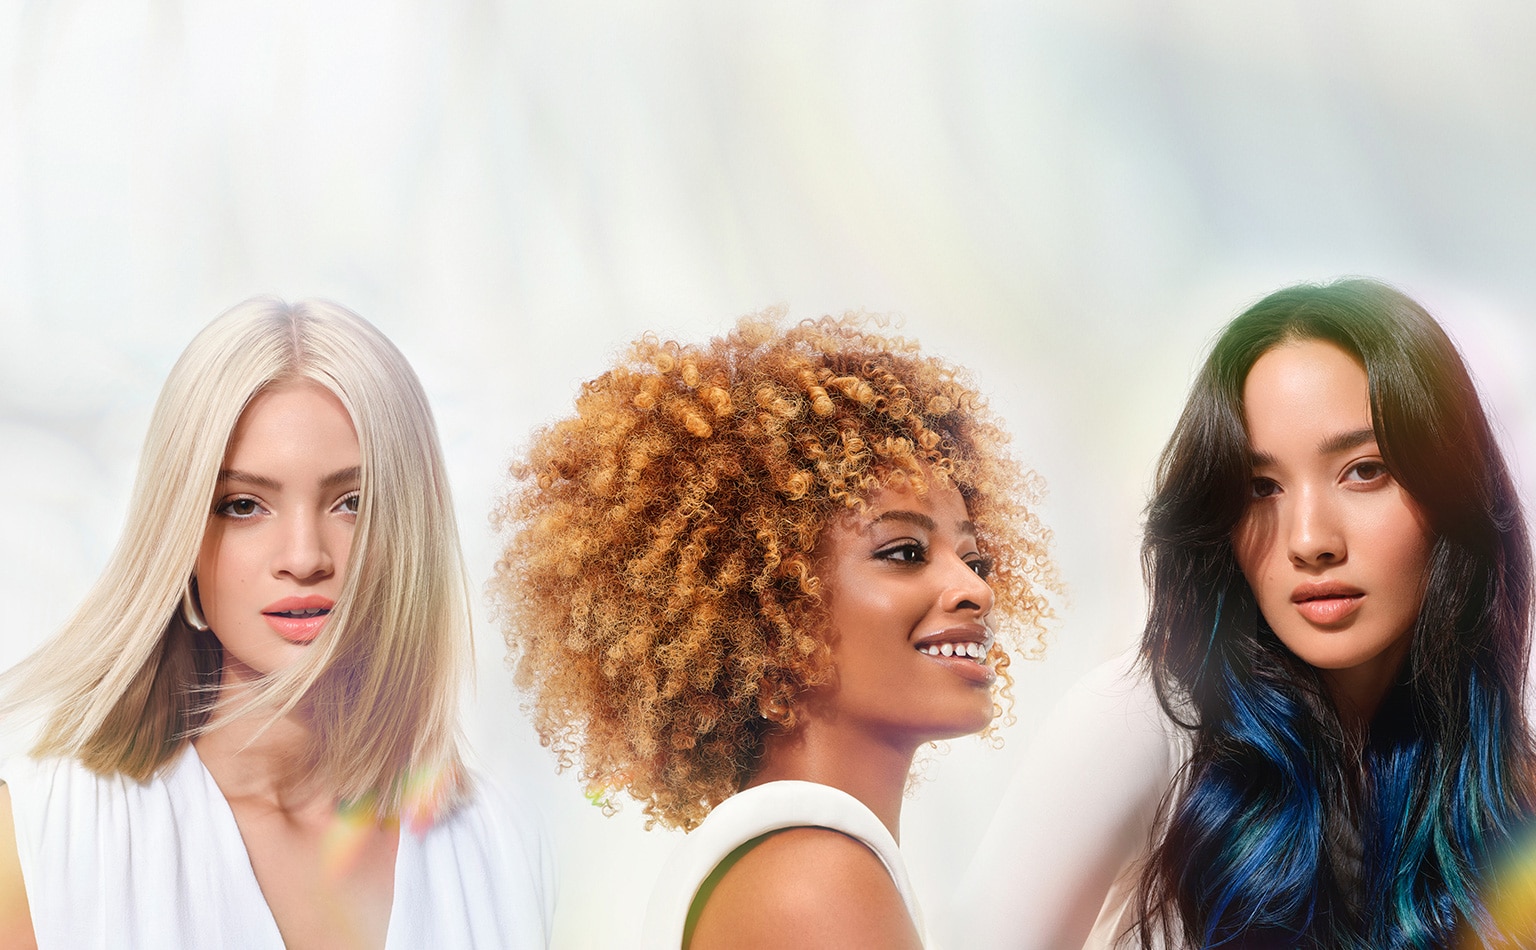 Infinite hair color possibilities customized to your vibe.